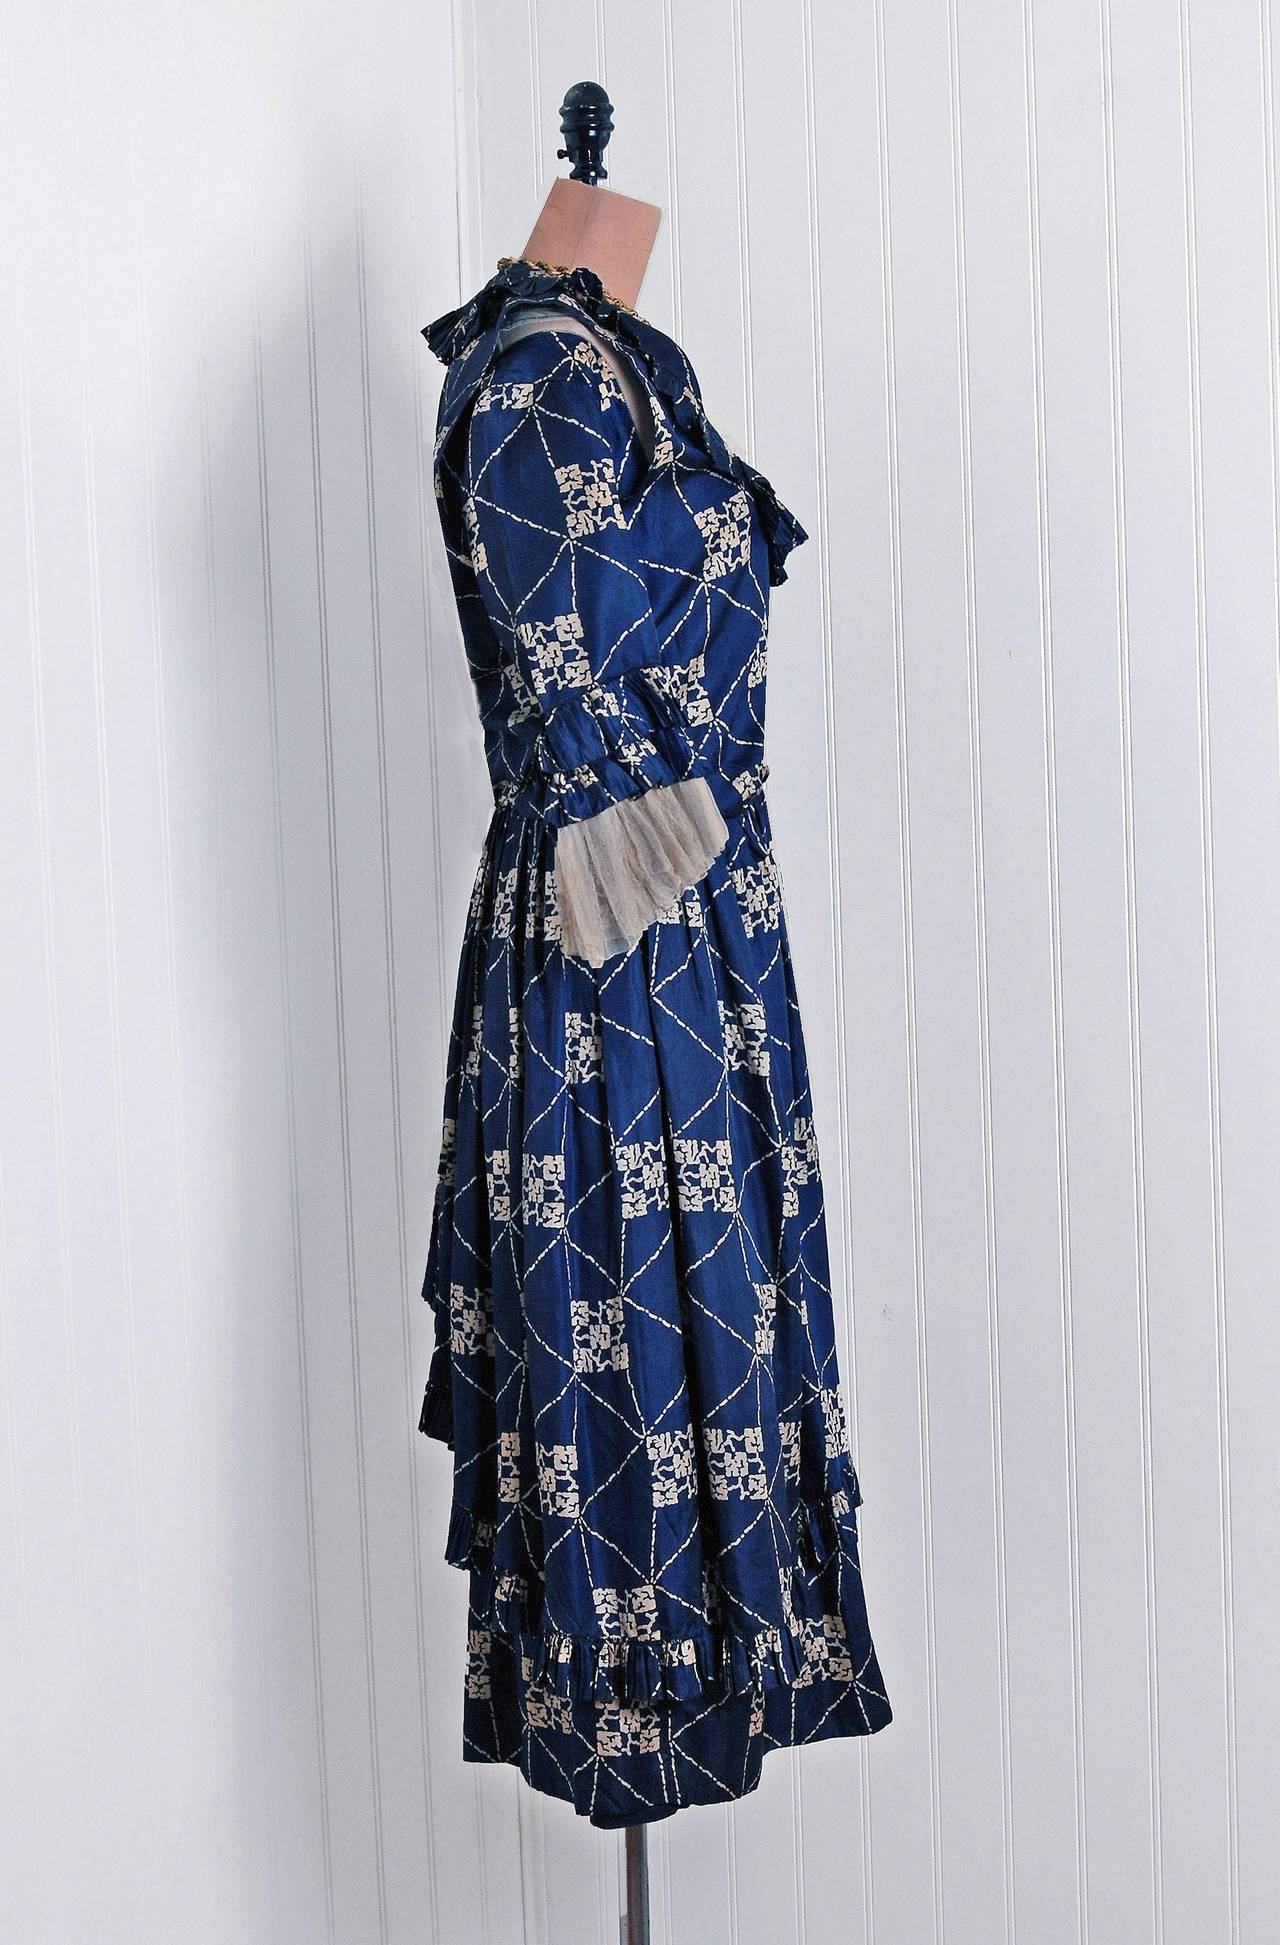 Beautiful 1920's French day dress fashioned in the prettiest navy-blue deco print silk. I love the ivory net-tulle accents and beautiful couture detailing. The bodice is complete with an elegant bib-collar and poet-style tiered ruffle sleeves. It is